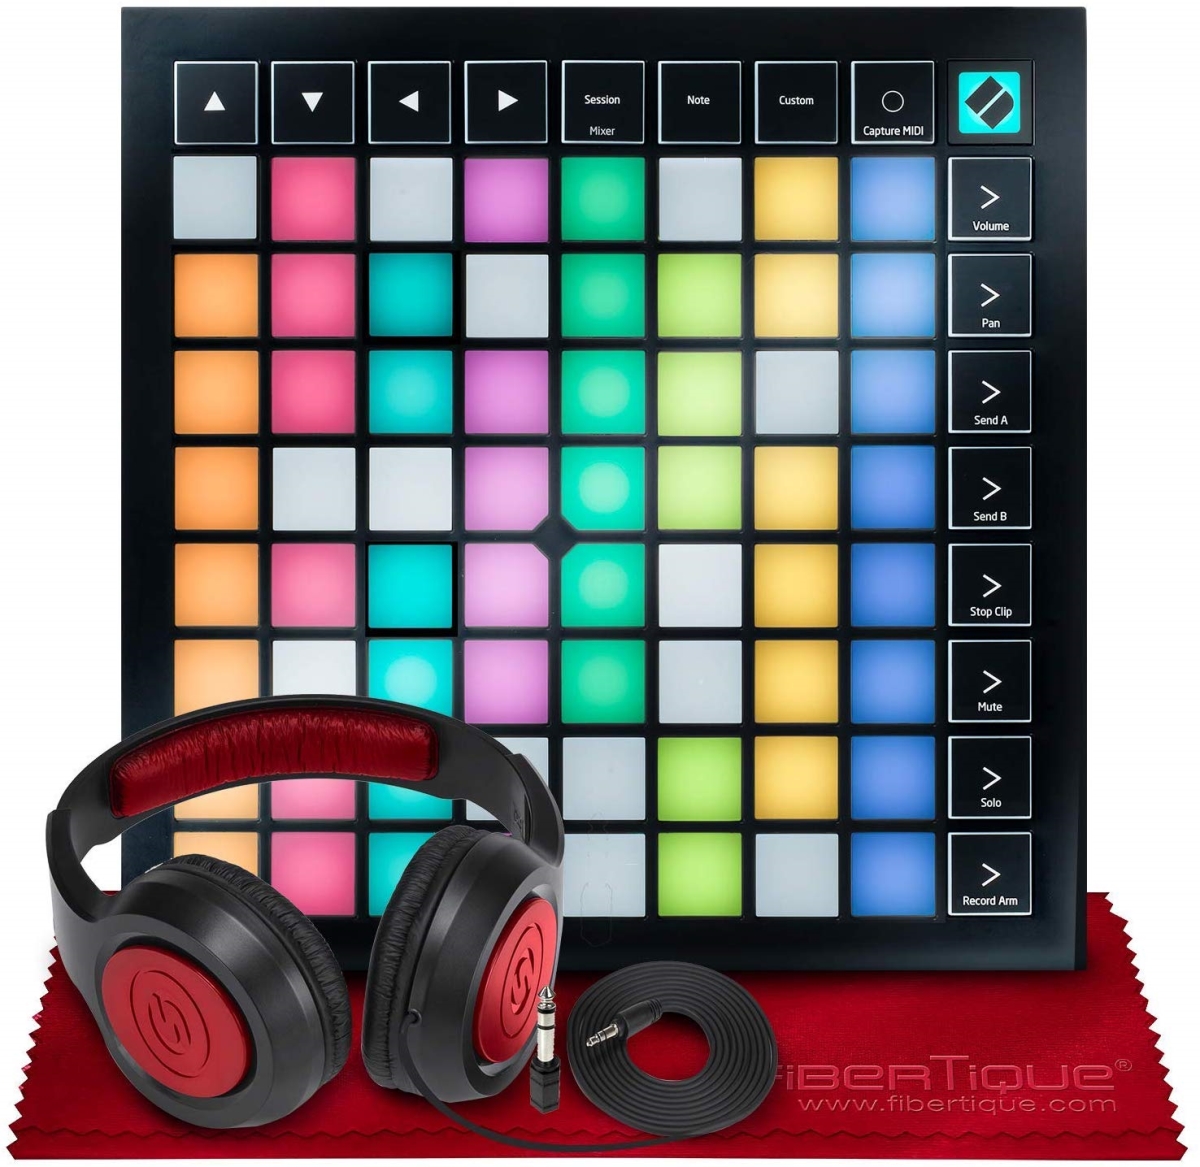 Picture of Novation NOVATION-LAUNCHPAD-X-B-KIT3968-NFBA X Ableton Live 8 x 8 64 Backlit RGB Pads Grid Controller with SR360 Over-Ear Dynamic Stereo Headphone